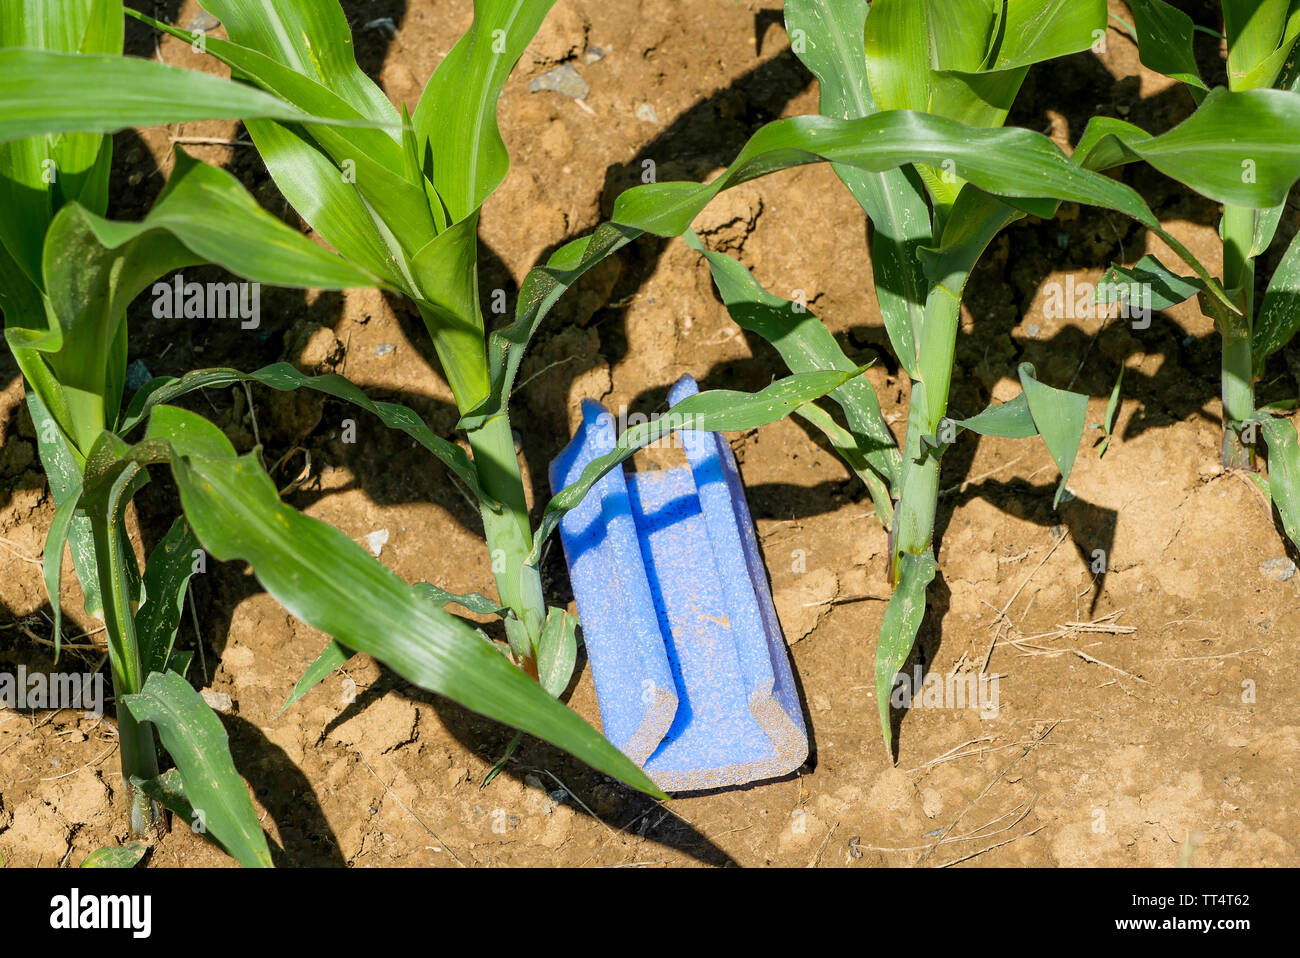 Pollution, a piece of plastic abandoned in a corn field, France Stock Photo